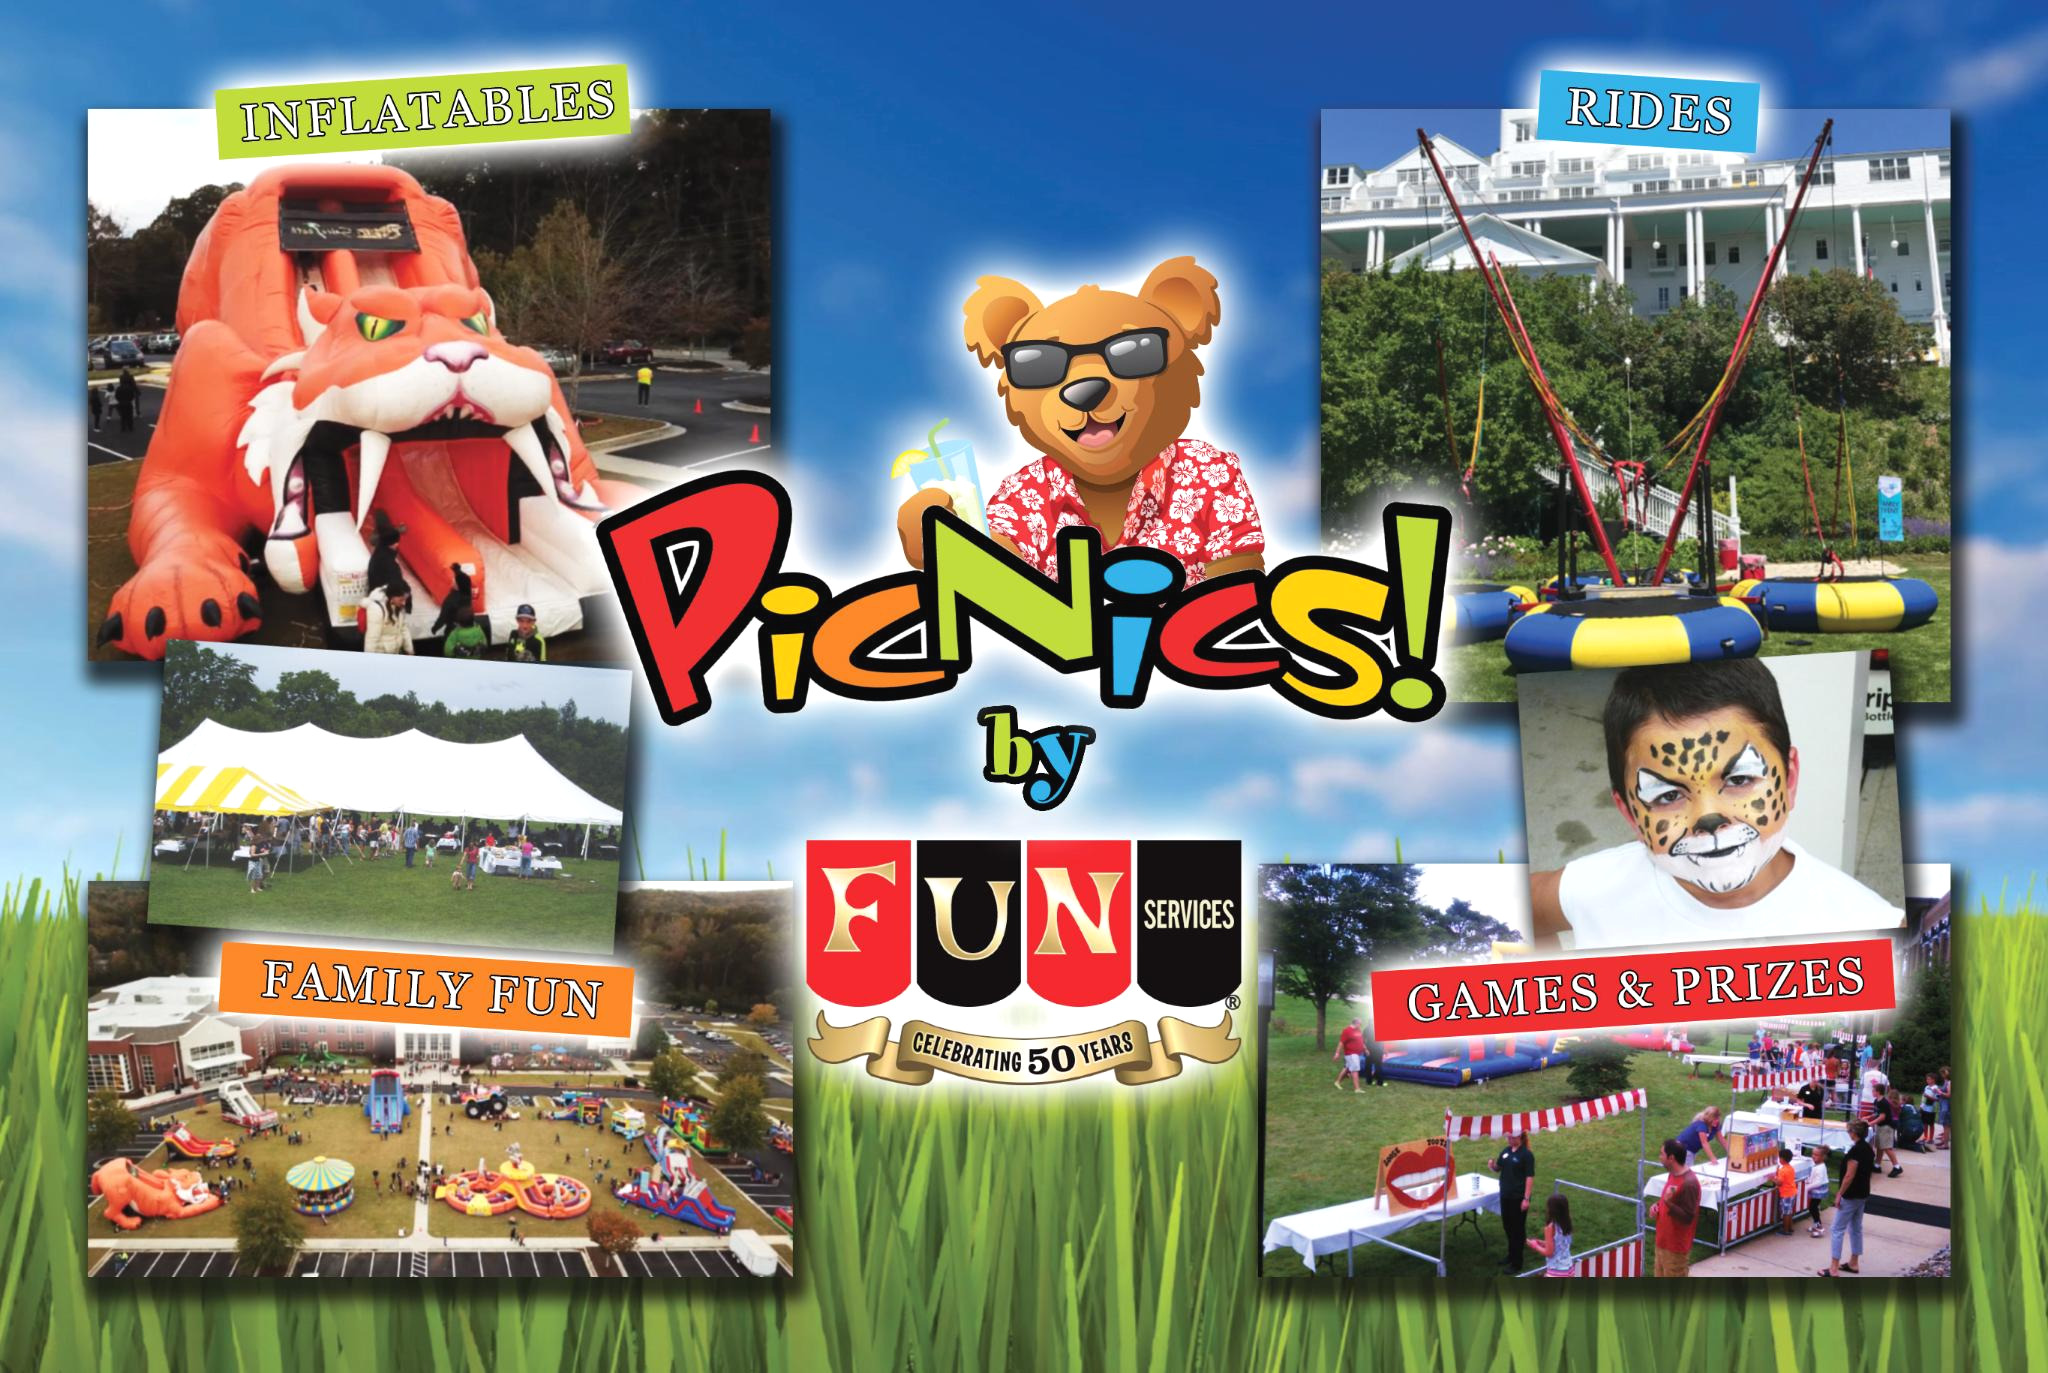 company picnics, family fun, inflatables, rides, corporate events